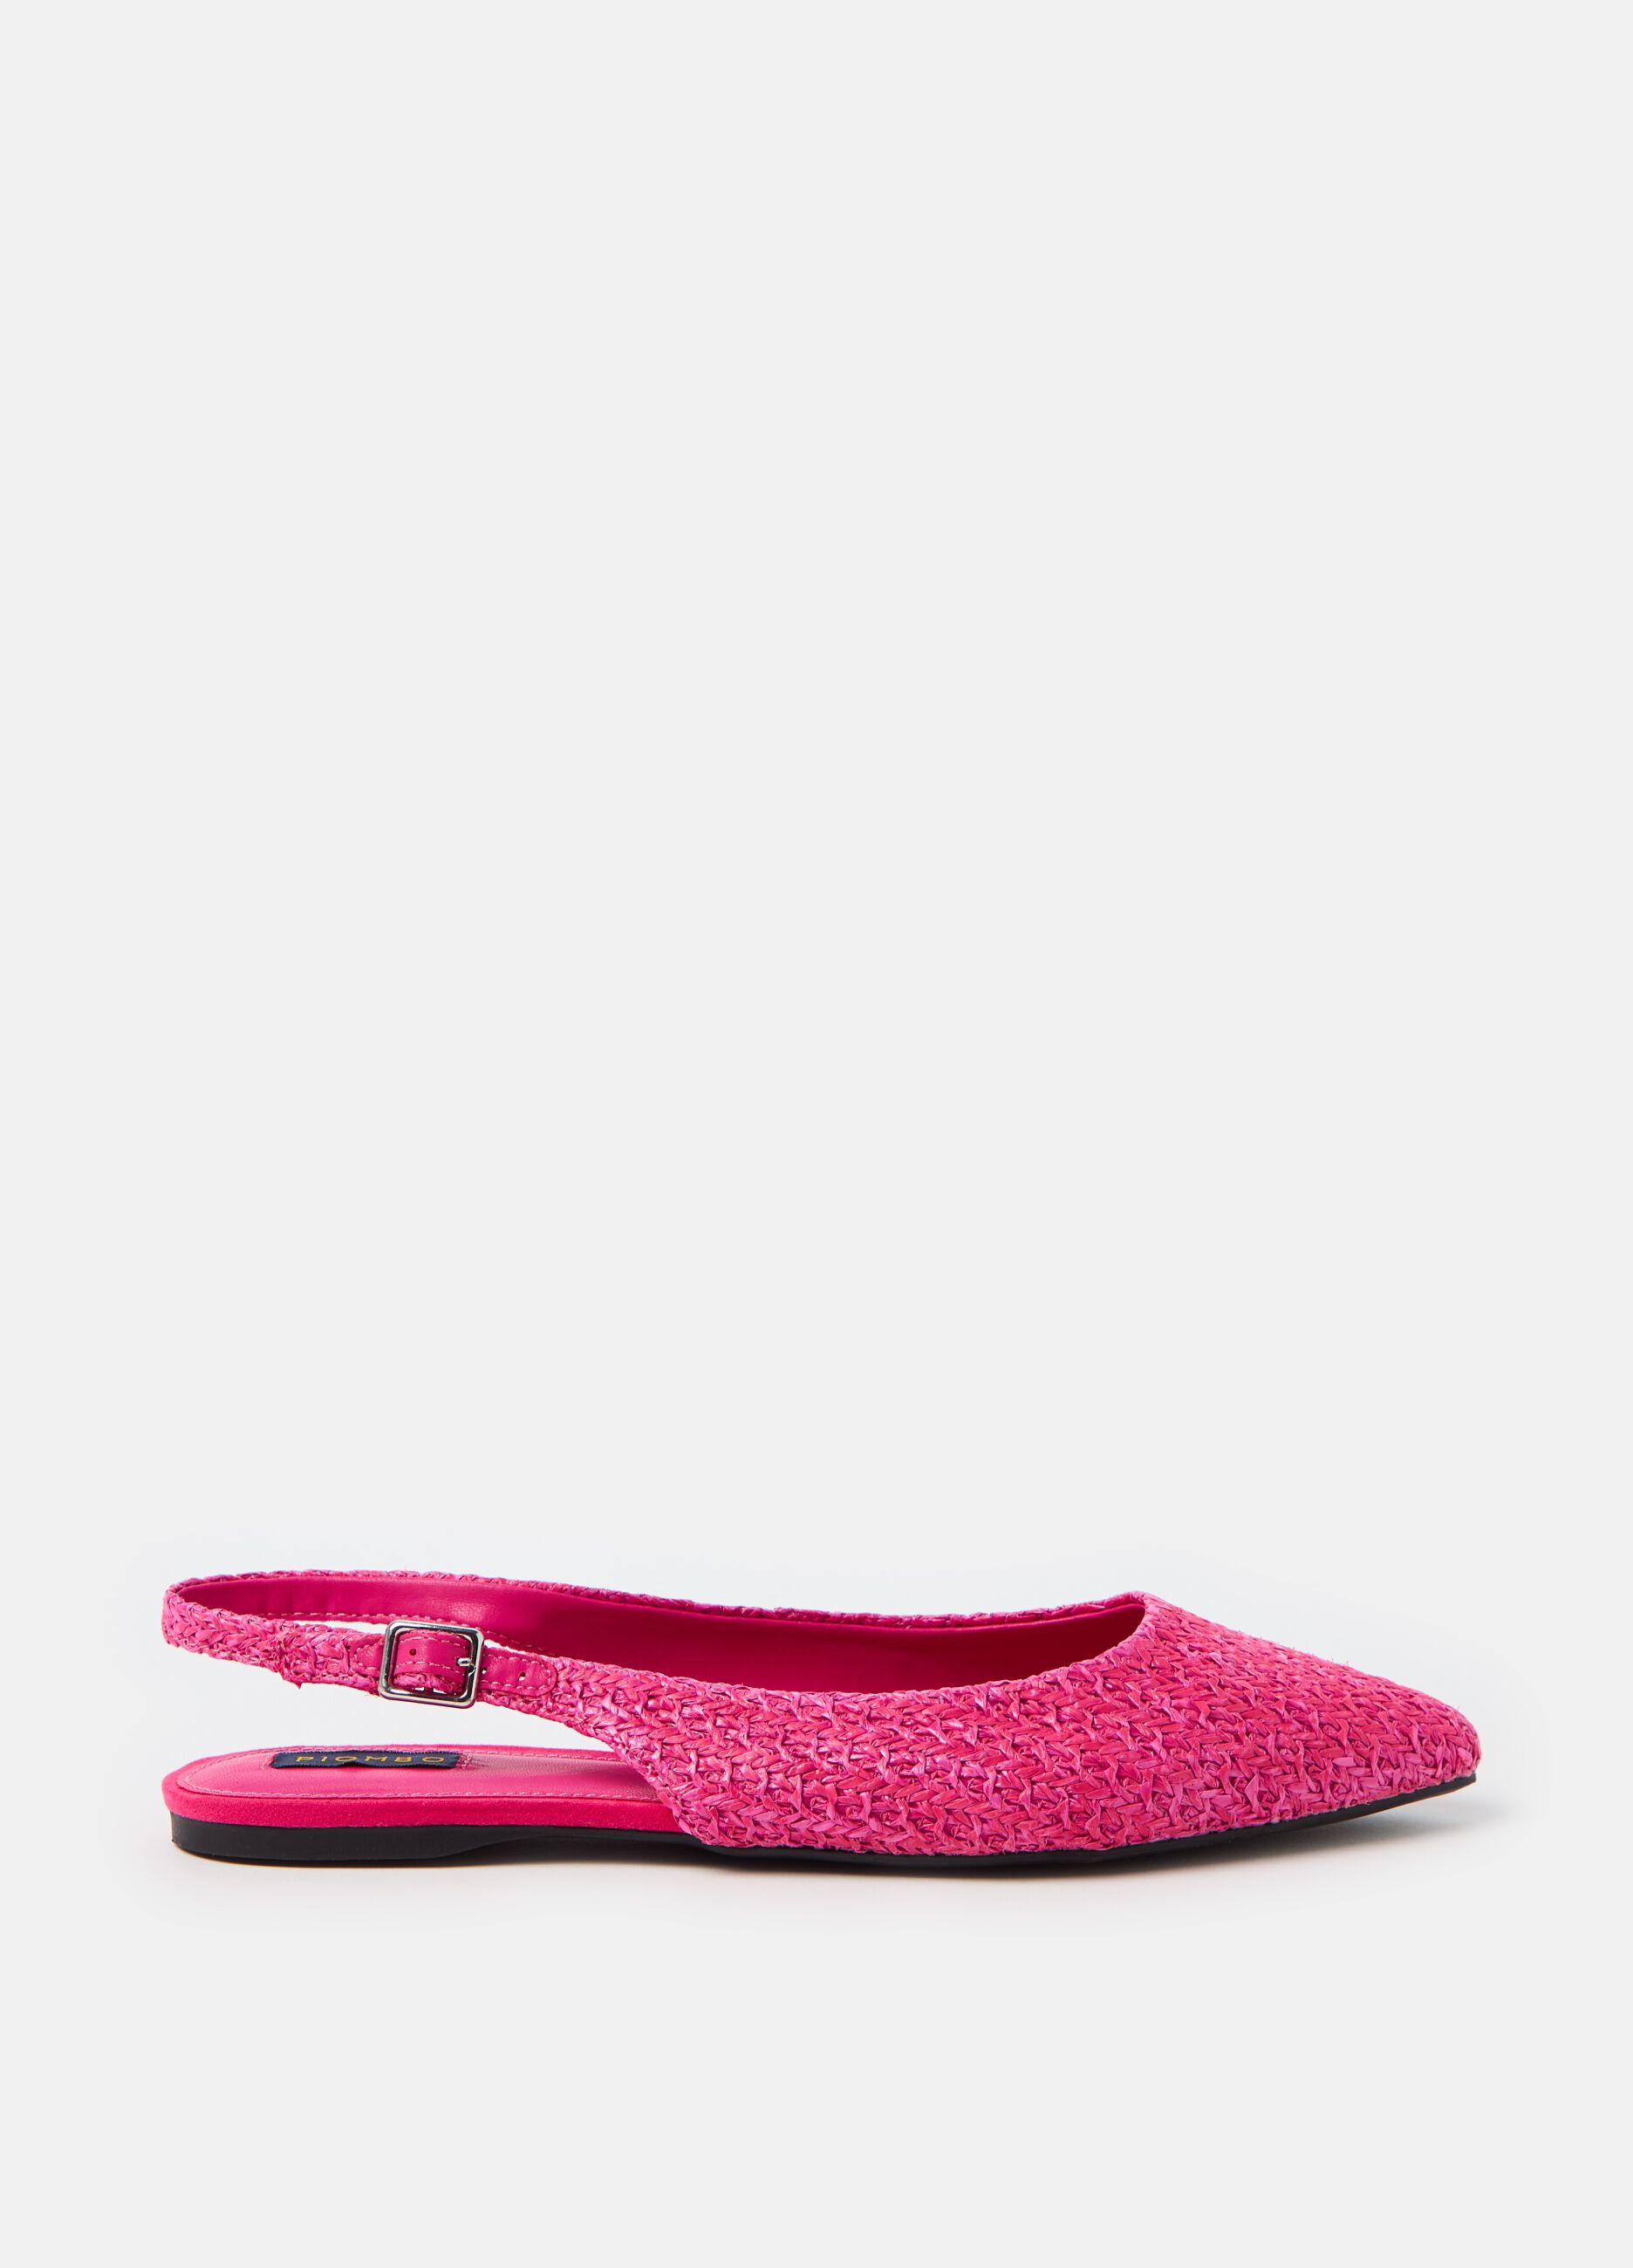 Slingbacks with cable-knit weave